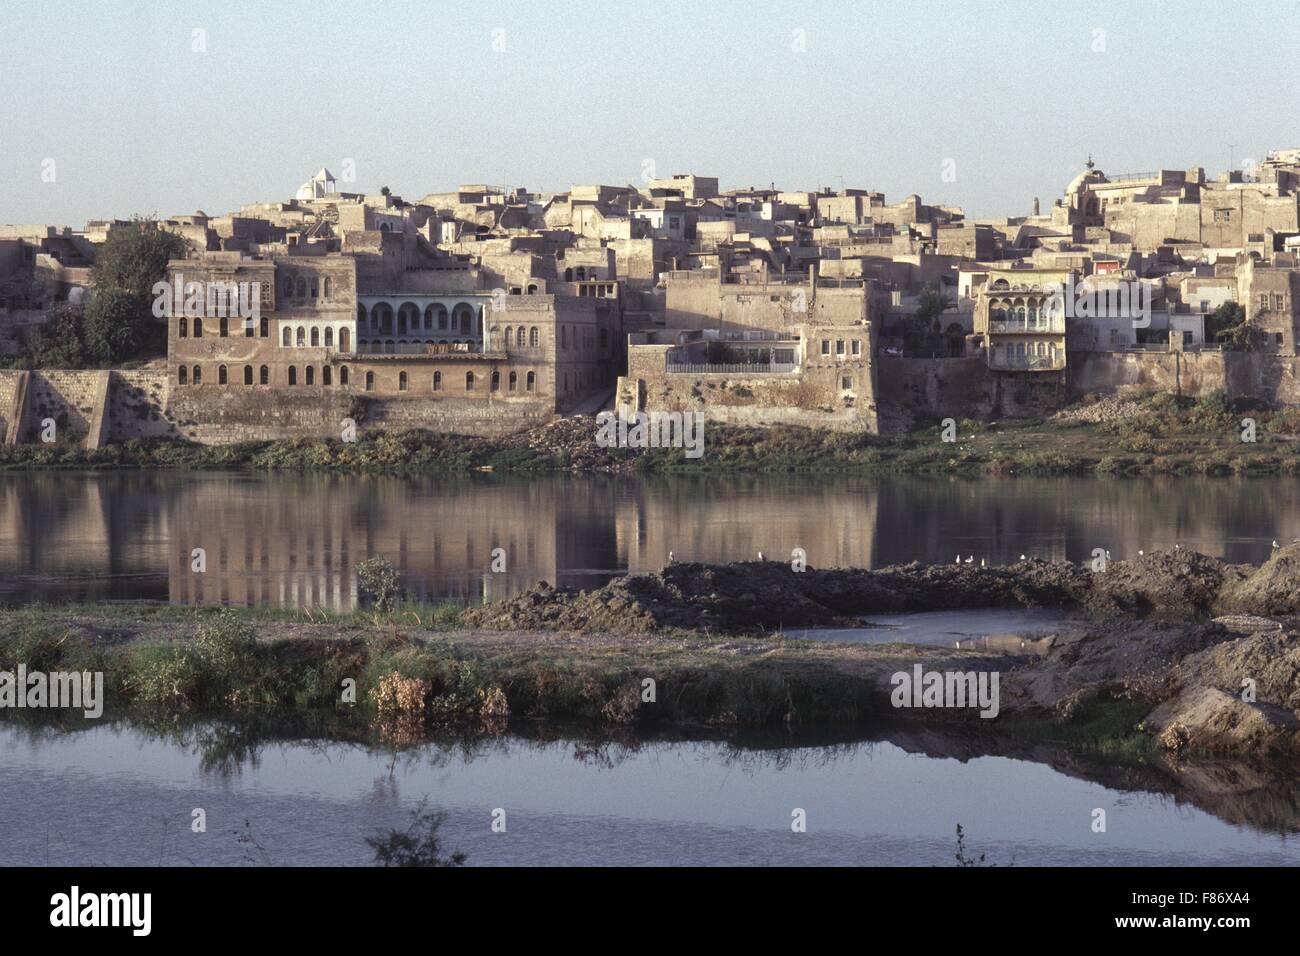 Nineveh, Iraq - A pastoral view of old houses at Nineveh on the banks of the Tigris not far from Nimrud, near Mosul. Stock Photo